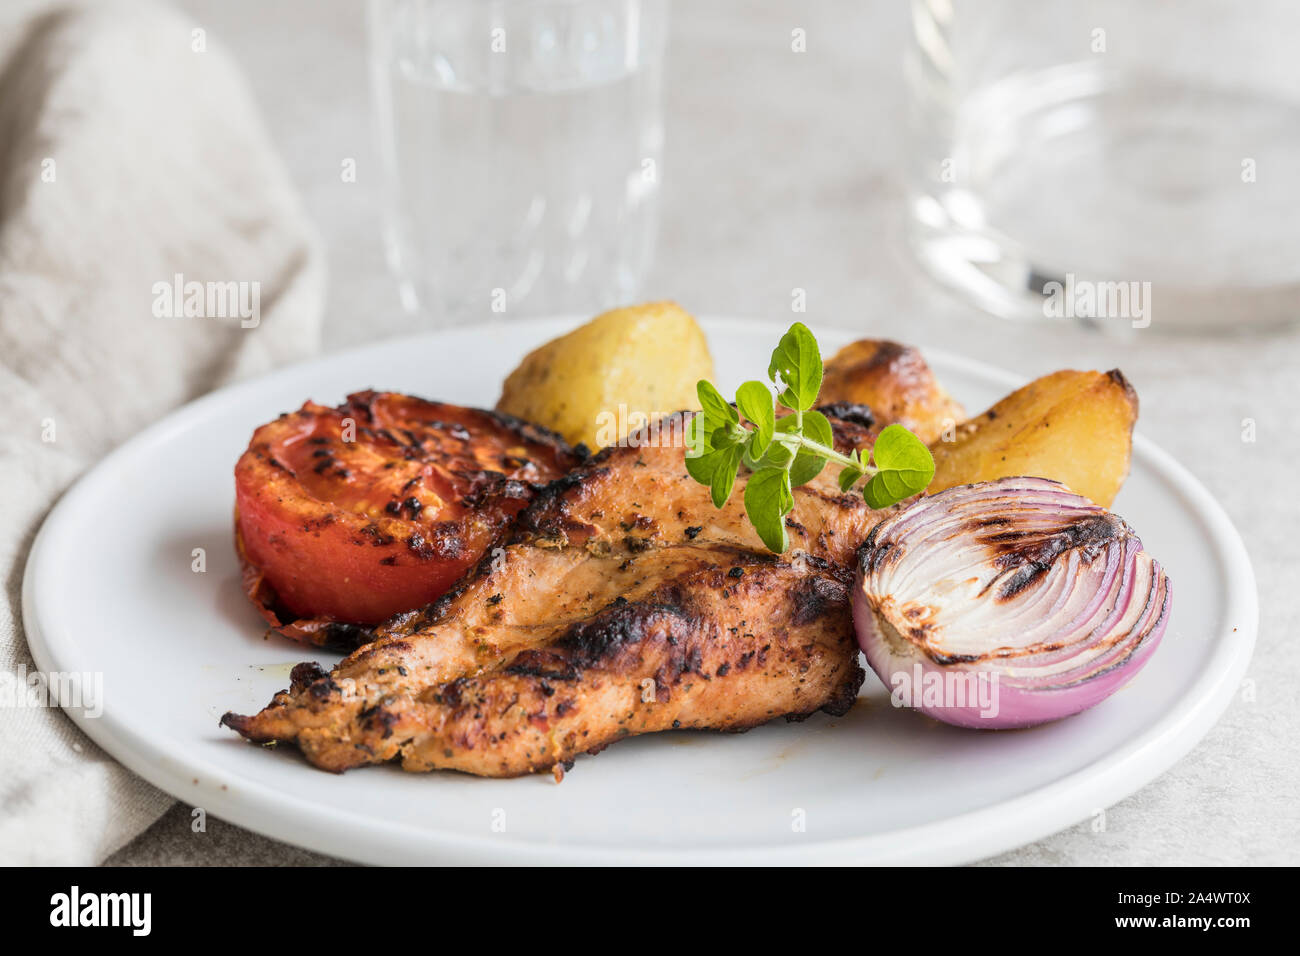 A fresh healthy meal with grilled chicken breast, roasted new potatoes, grilled tomato and grilled onion. The food is on a white plate with a glass of Stock Photo